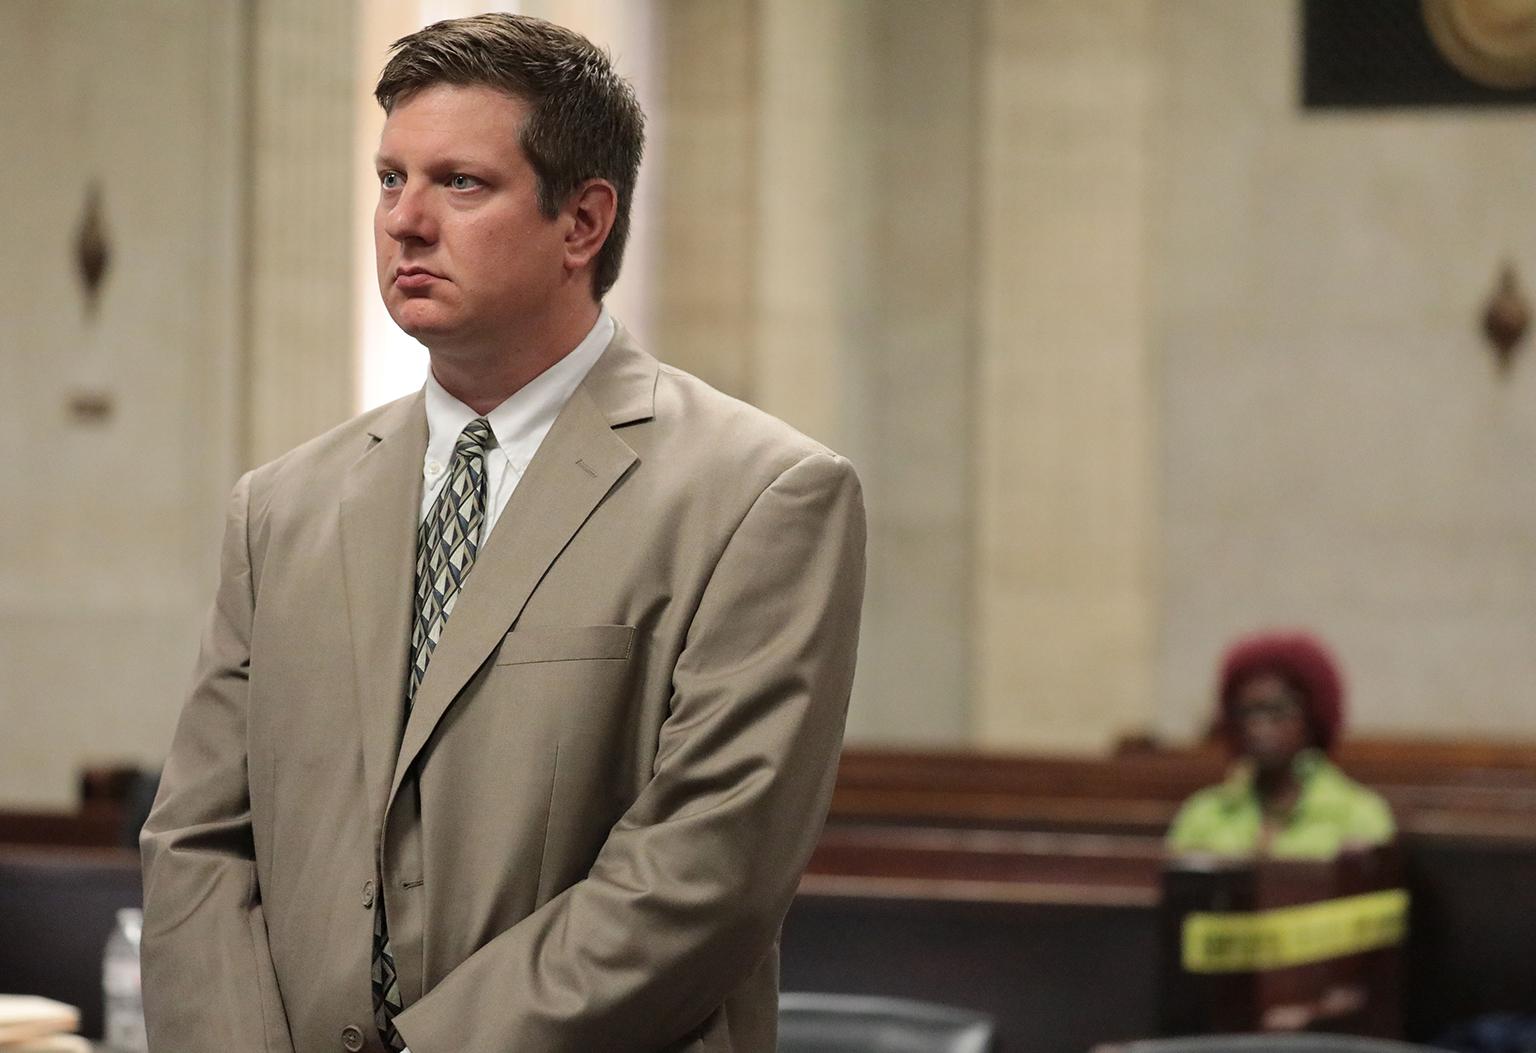 Chicago police Officer Jason Van Dyke listens to court arguments during a hearing Tuesday, July 31, 2018 at the Leighton Criminal Court Building in Chicago. Van Dyke is charged with first-degree murder in the shooting death of Laquan McDonald. (Antonio Perez / Chicago Tribune / Pool)